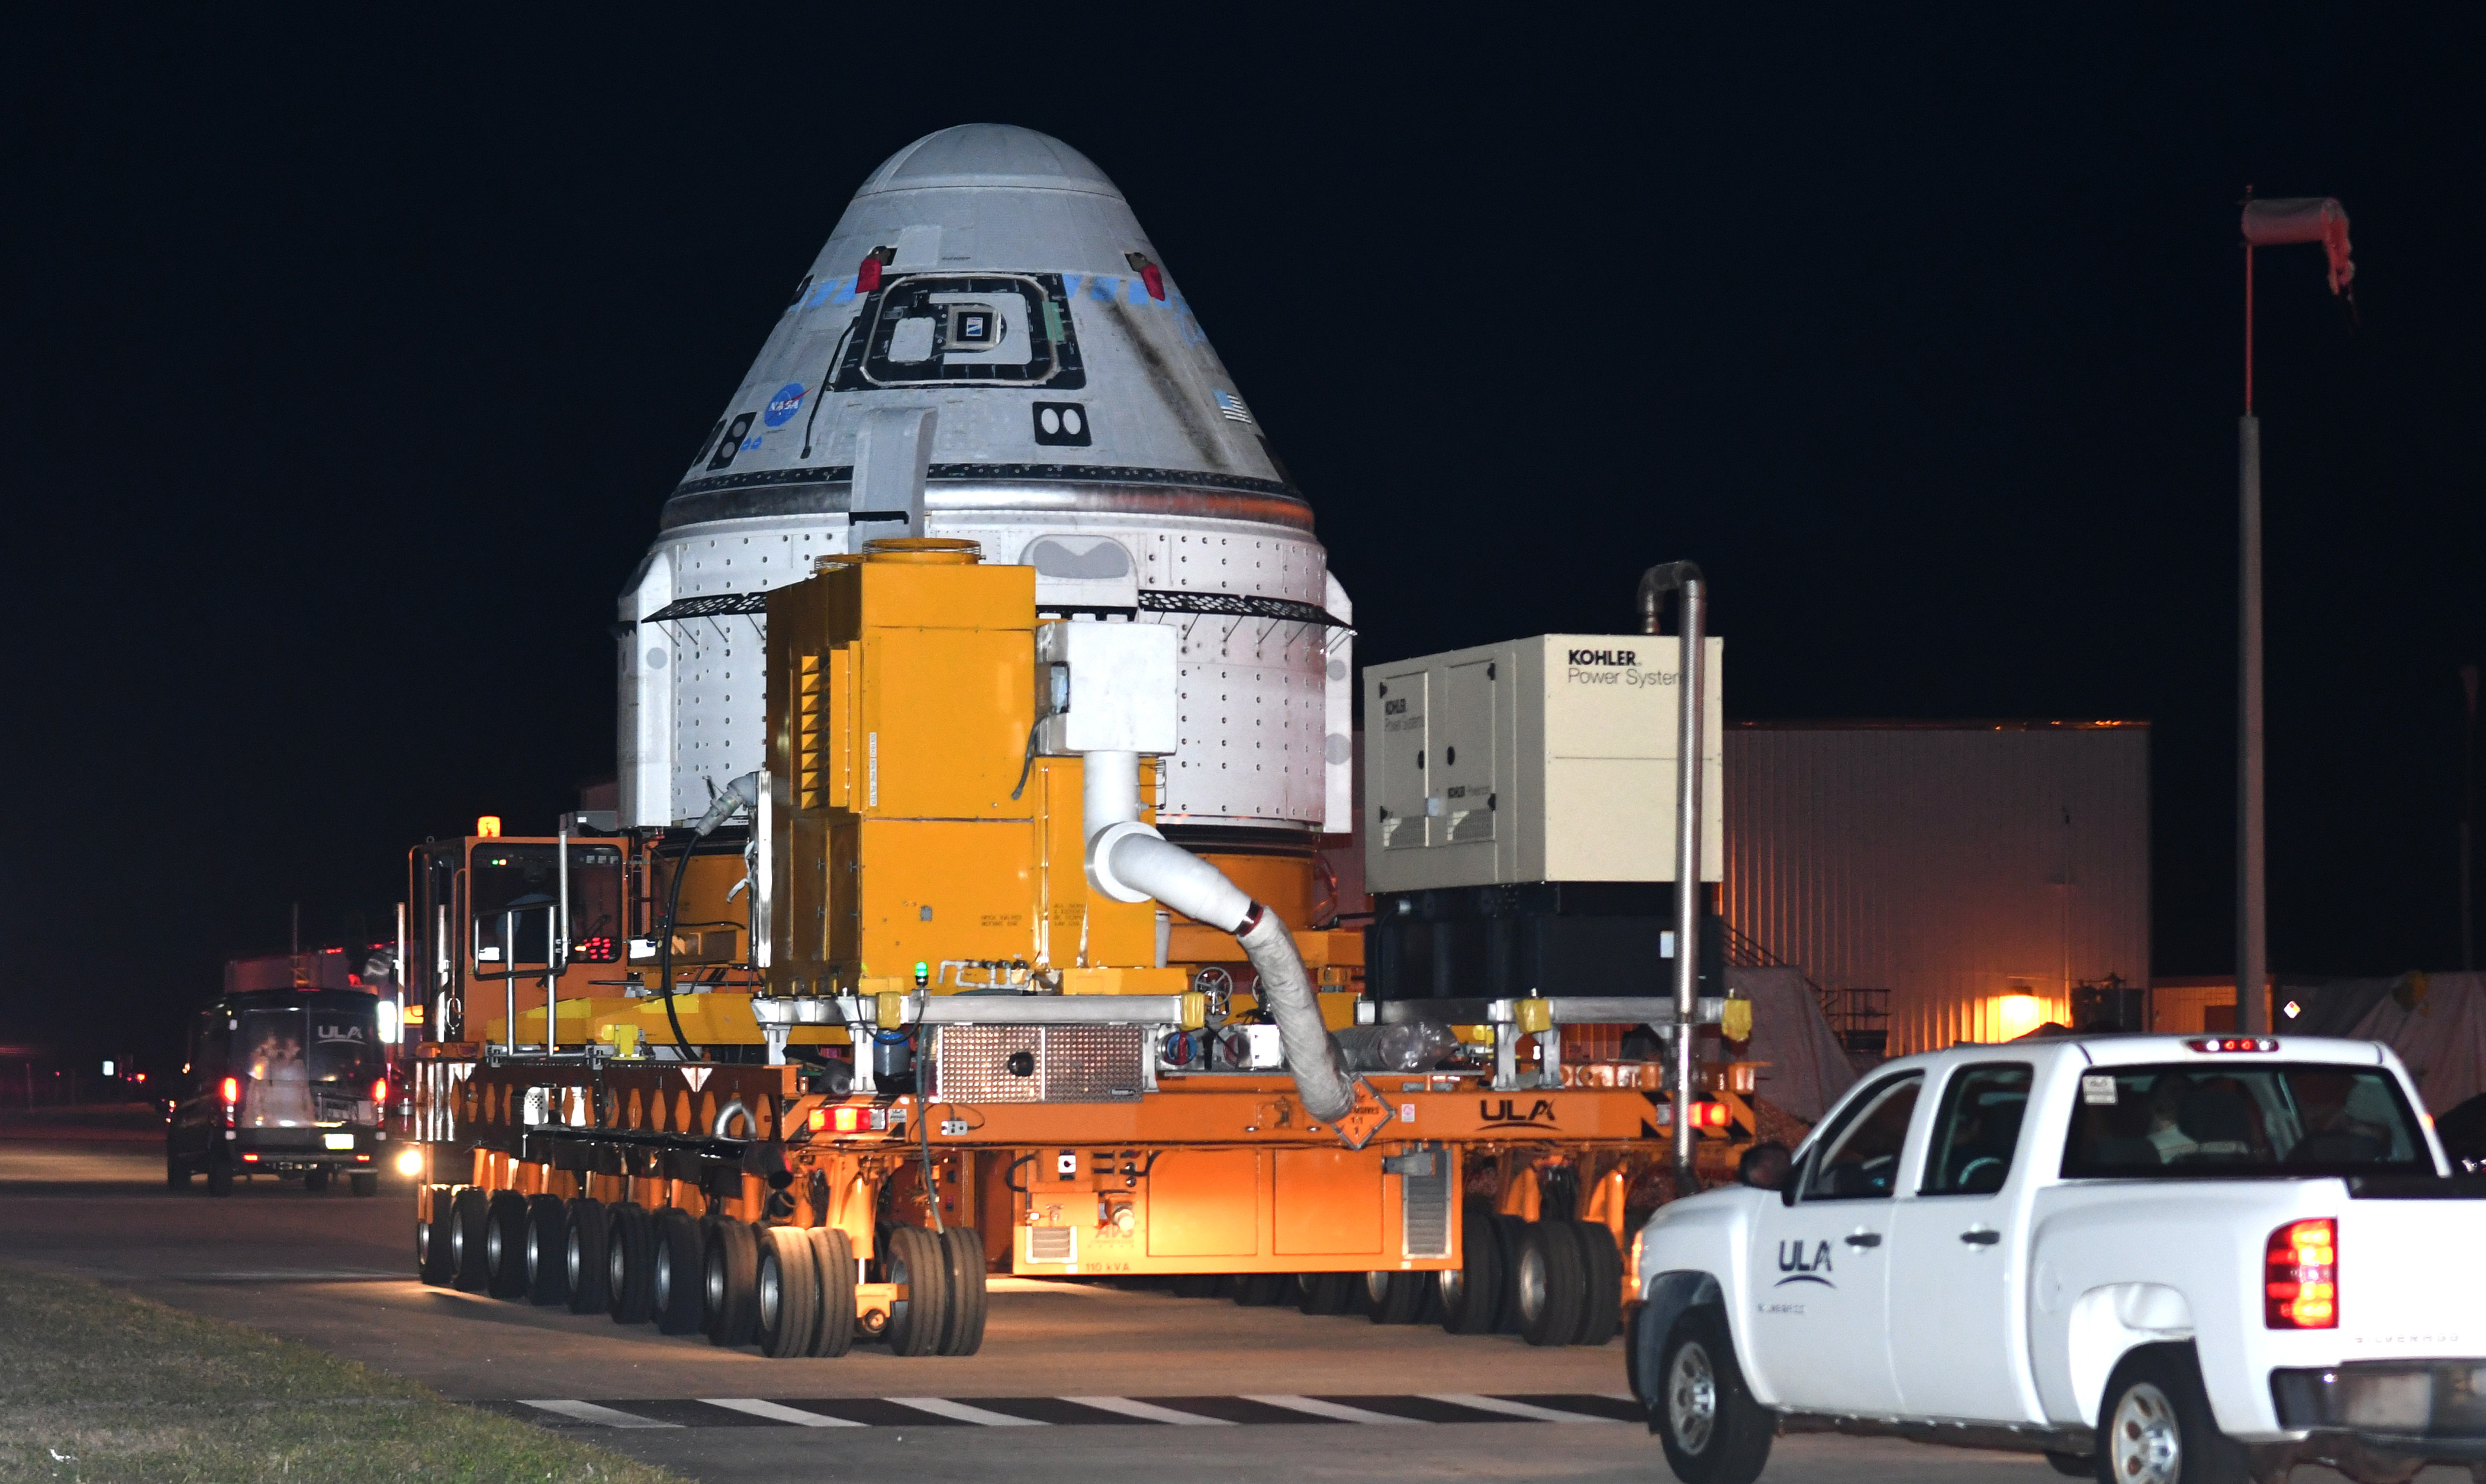 <p>Boeing's CST-100 Starliner spacecraft was rolled out of the Commercial Crew and Cargo Processing Facility at the Kennedy Space Center to be transported to pad 41 at Cape Canaveral Space Force Station in Cape Canaveral, Florida, on April 16, 2024. </p><p>Starliner is scheduled for its first crewed launch to the International Space Station on a ULA Atlas V rocket with NASA astronauts Suni Williams and Butch Wilmore on May 6, 2024.</p>